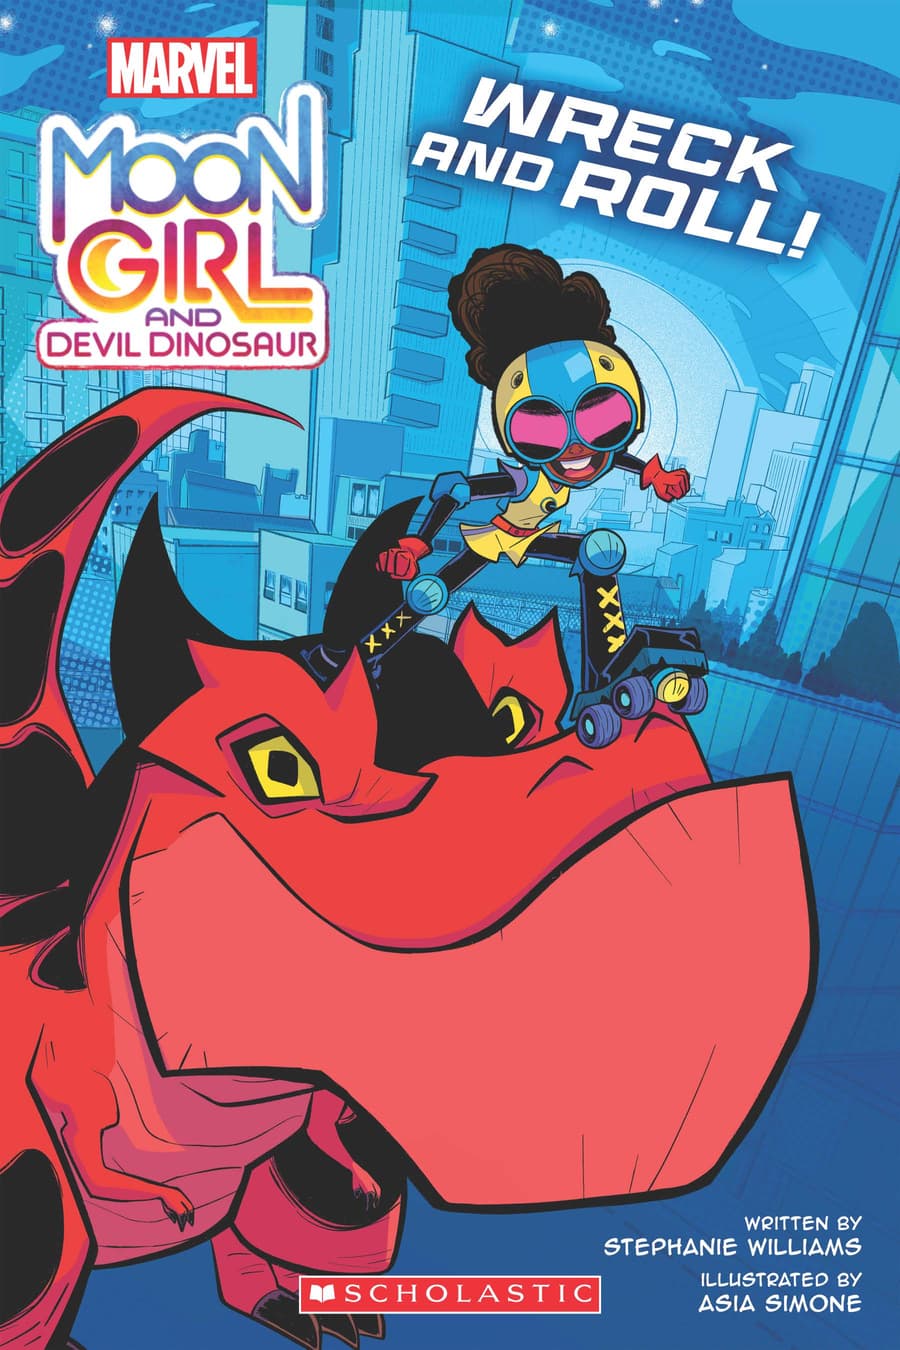 Cover to Moon Girl and Devil Dinosaur: Wreck and Roll!